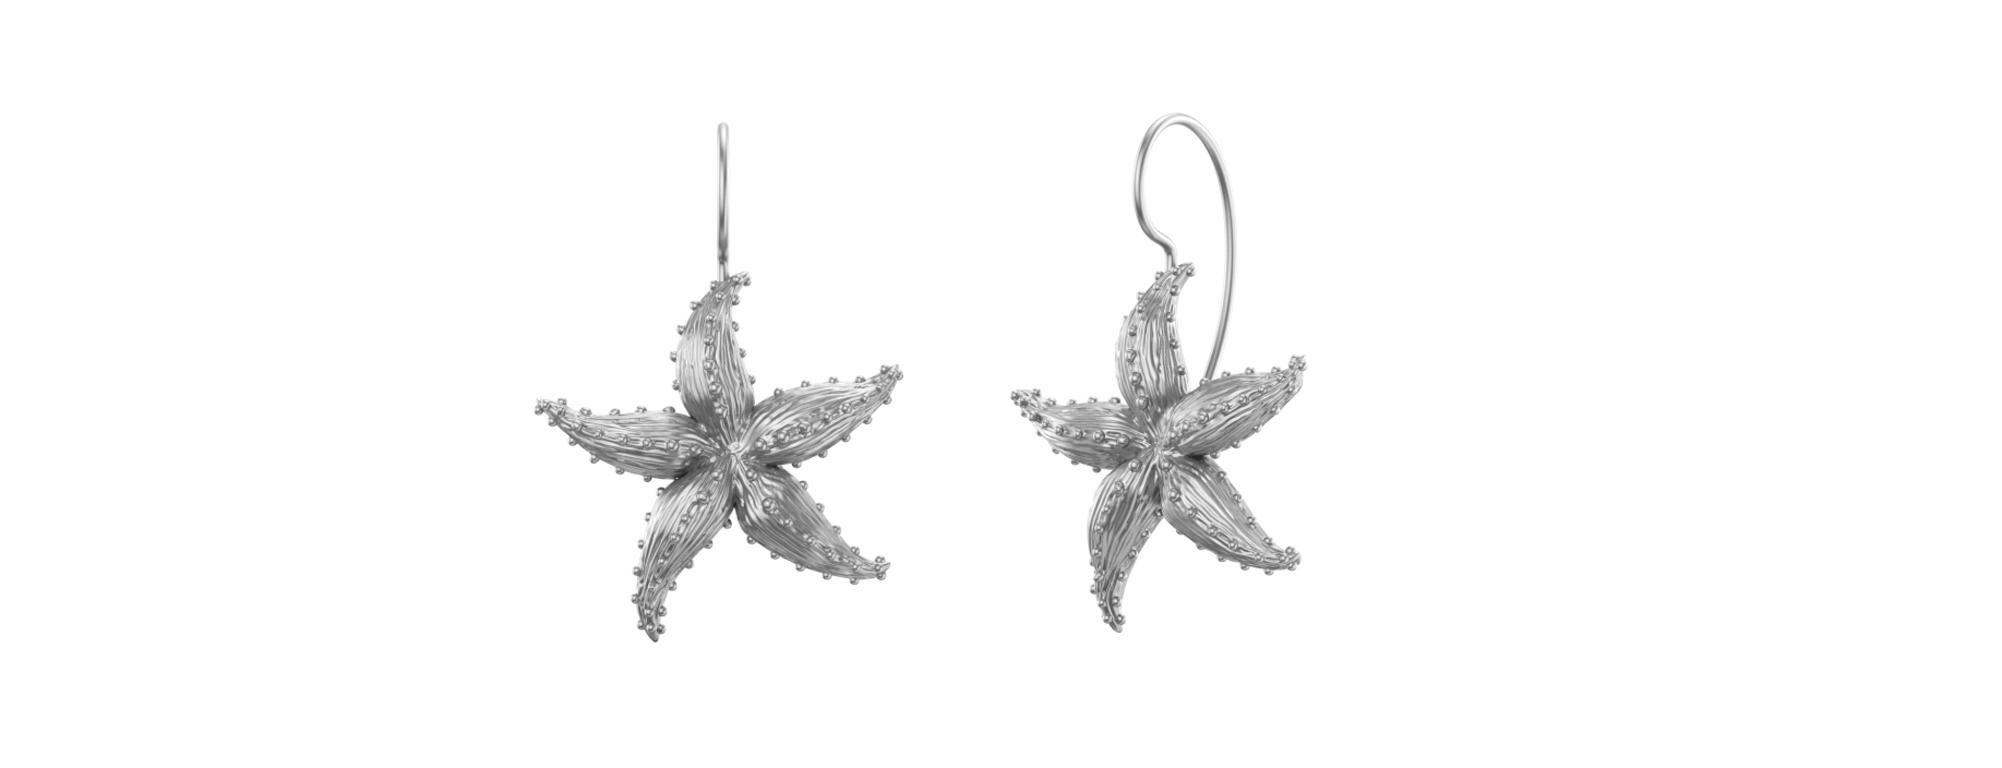 Platinum Starfish  Earrings, The Ocean series.  Summer or winter depending where you live, for the beach lovers. Inspired from sea creatures, with their great shapes and colors. Matte finished. 
These stars are 25 mm tall plus the hook.  These are